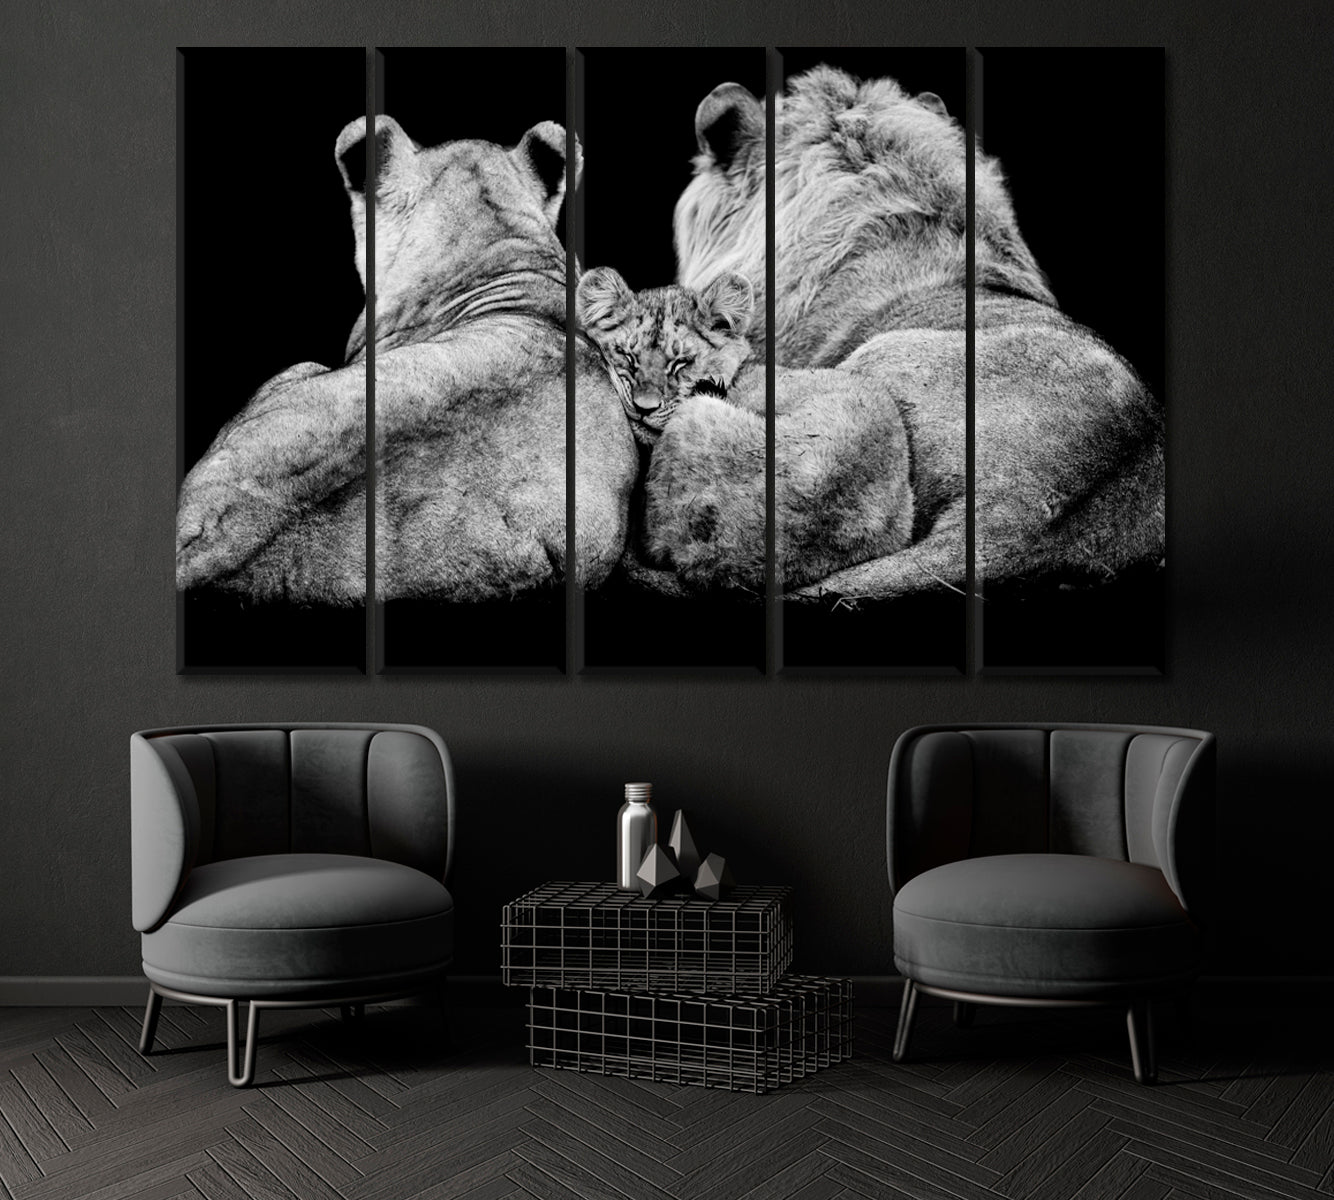 Lion Family Canvas Print ArtLexy 5 Panels 36"x24" inches 